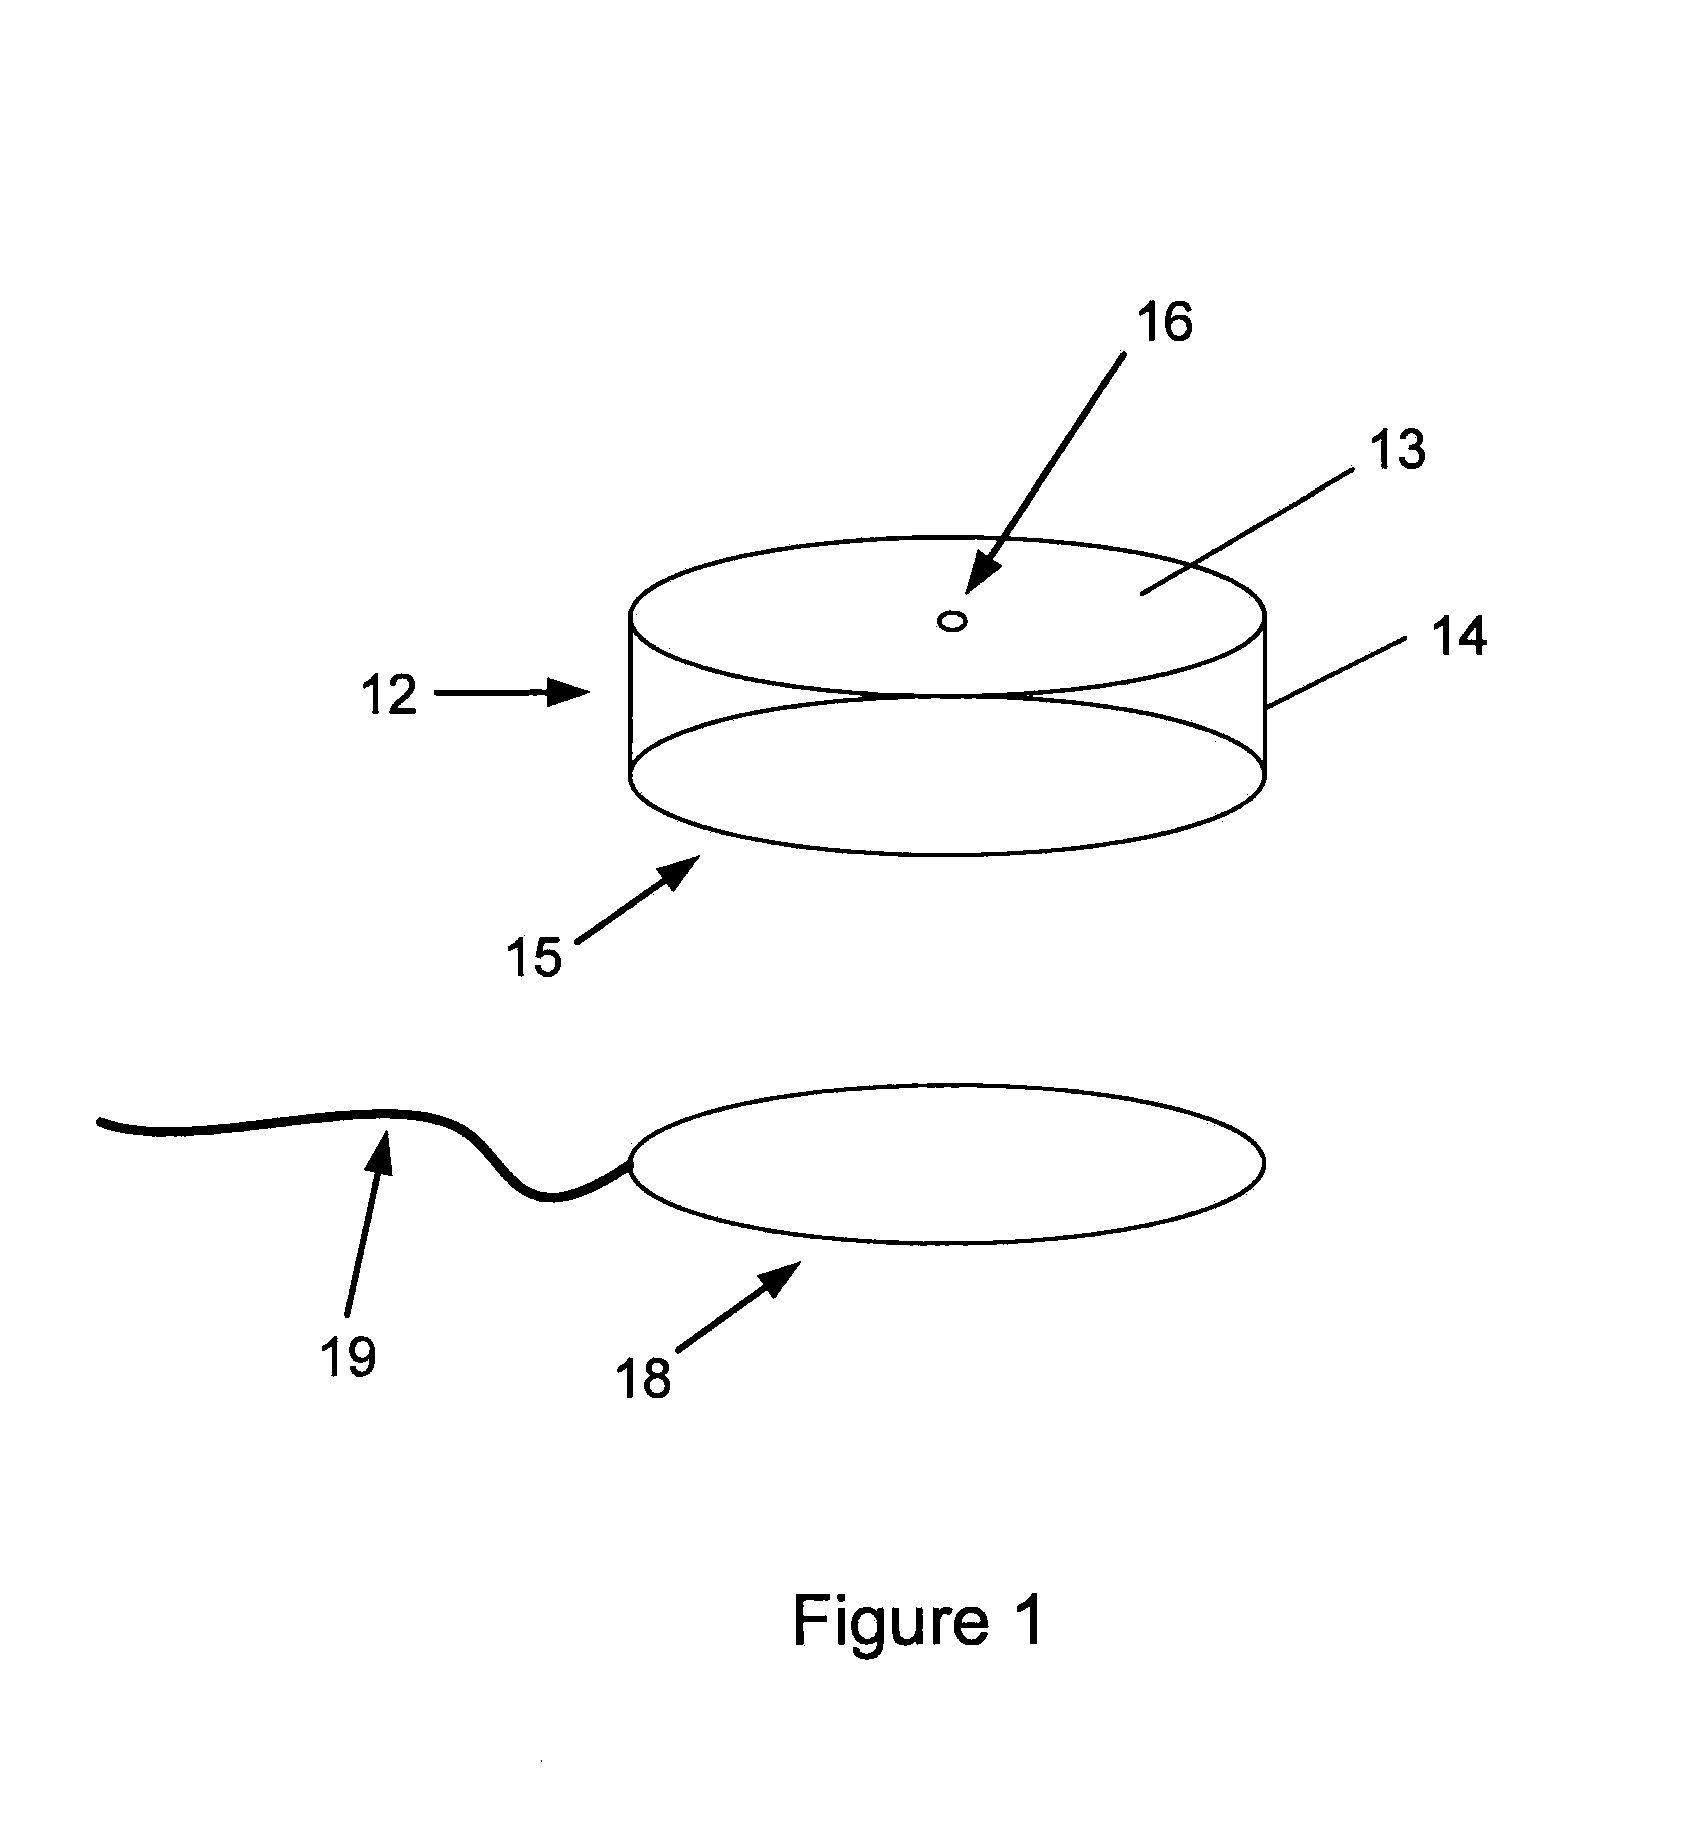 Actuator for delivery of vibratory stimulation to an area of the body and method of application